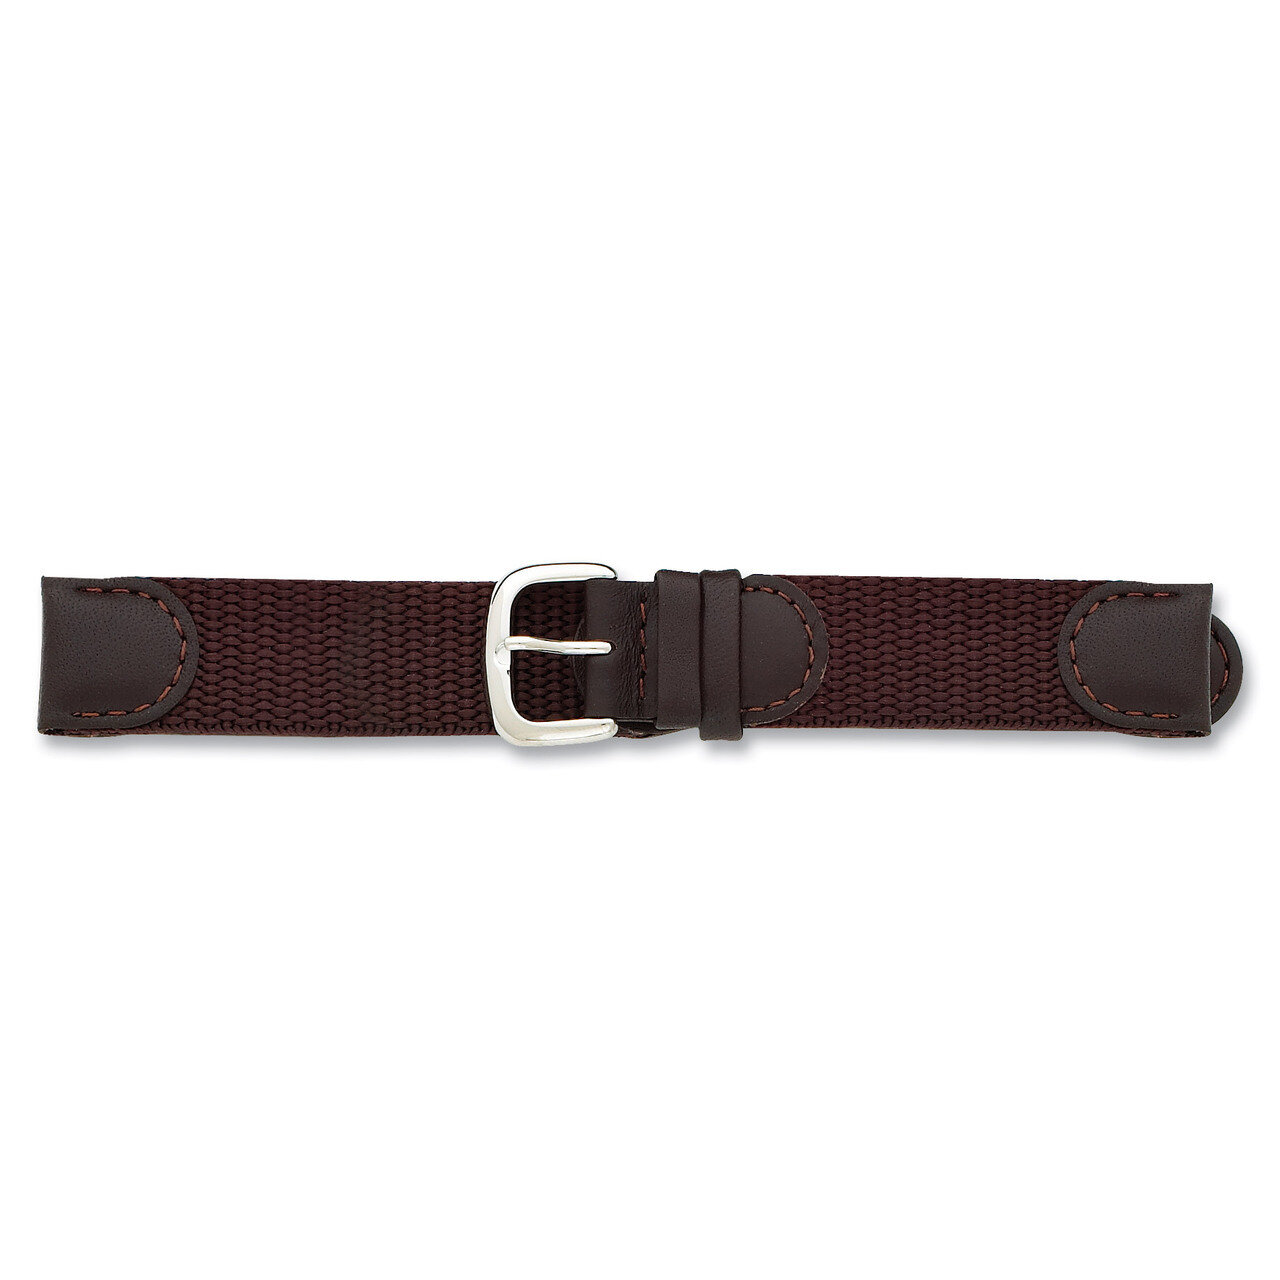 19mm Brown Army Style Fabric Watch Band 7.75 Inch Silver-tone Buckle BA139-19